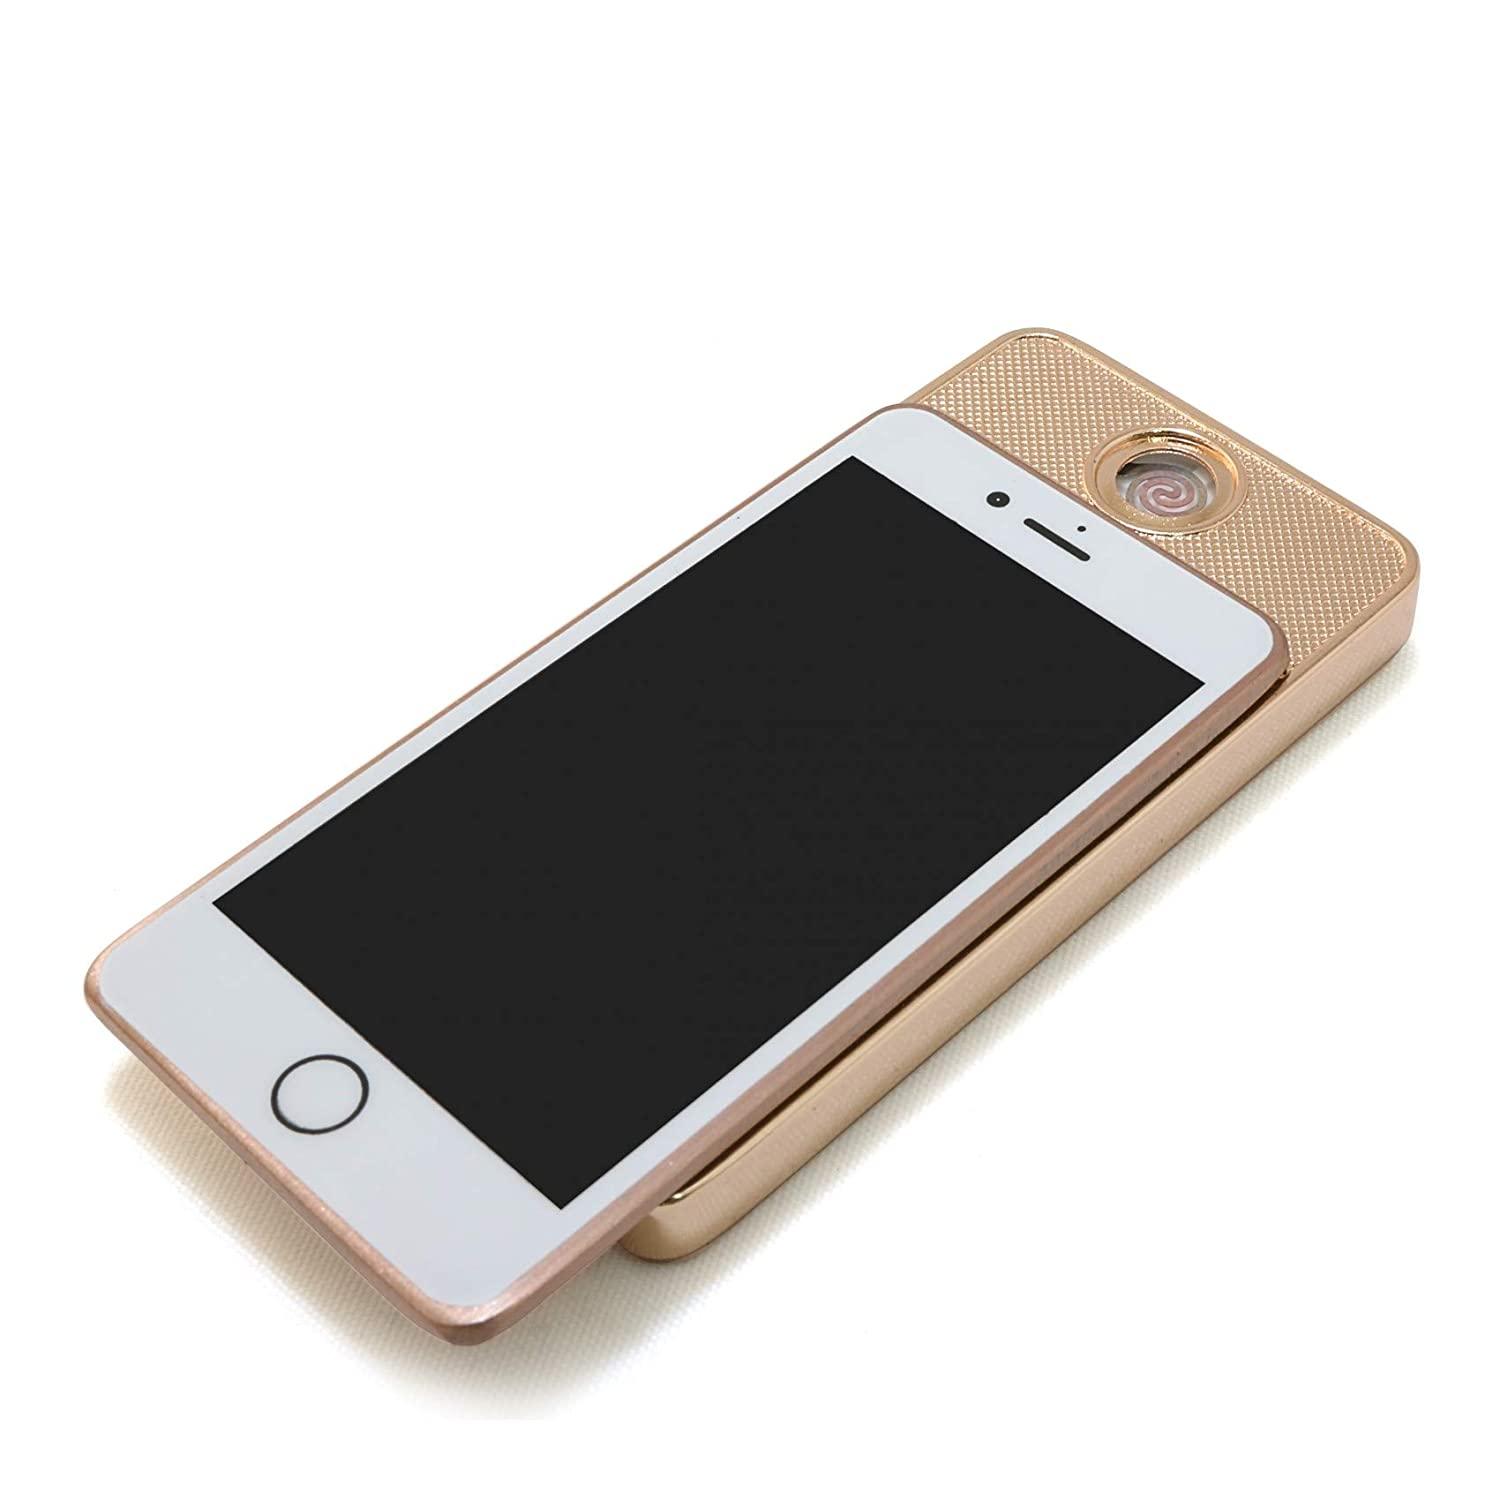 Rechargeable flameless cigarette lighter for iPhone 6.5 cm 